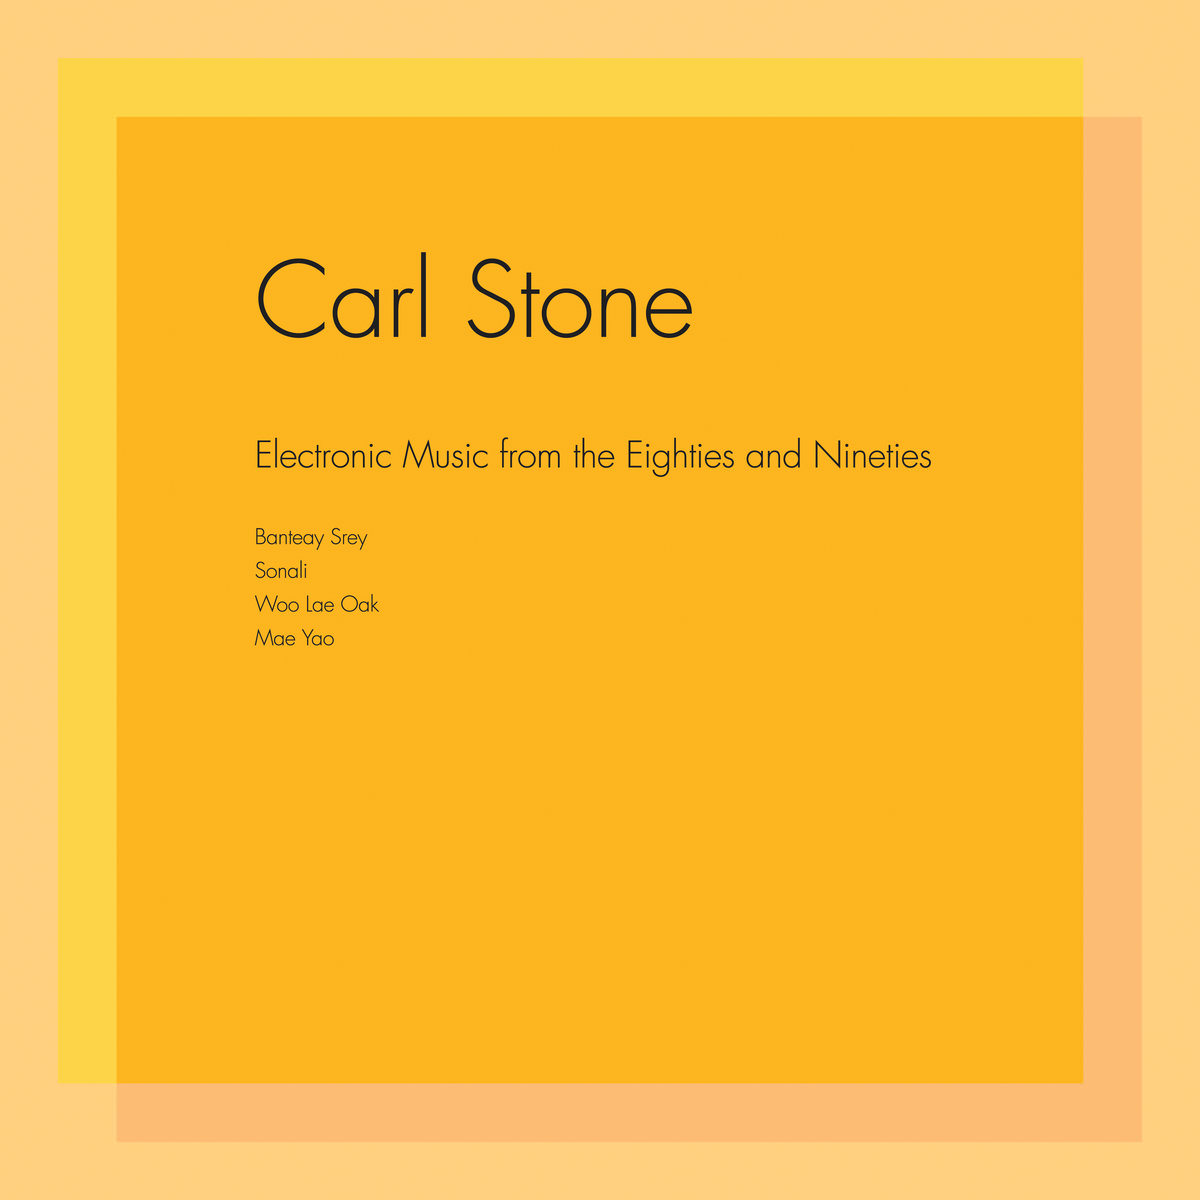 Carl Stone - Electronic Music from the Eighties and Nineties (2018) [FLAC 24bit/44,1kHz]